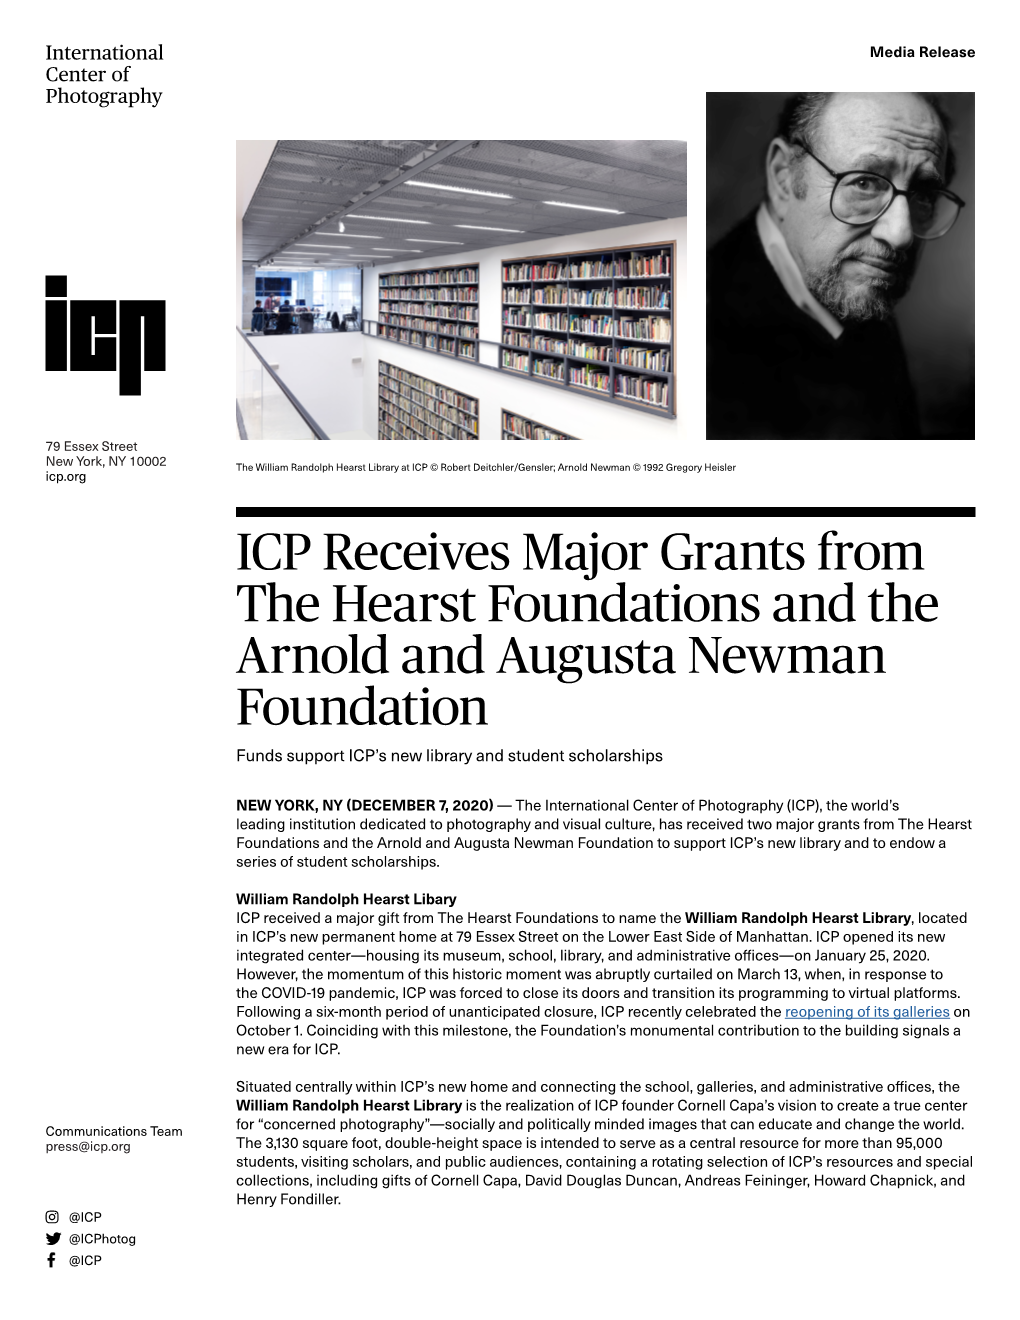 ICP Receives Major Grants from the Hearst Foundations and the Arnold and Augusta Newman Foundation Funds Support ICP’S New Library and Student Scholarships